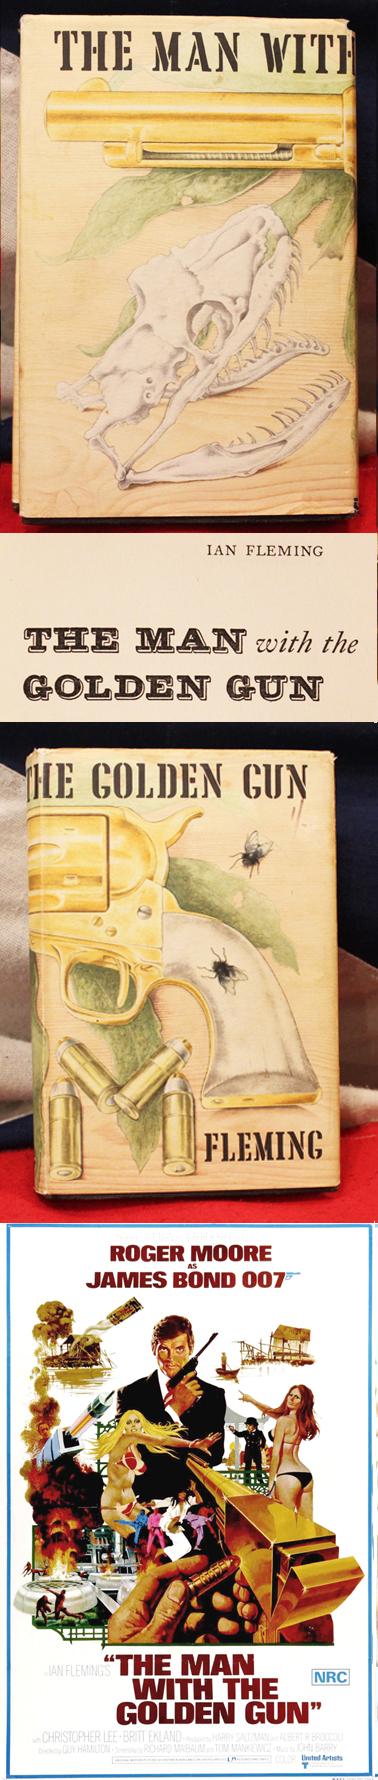 The Lanes Armoury | 1st Edition James Bond, Man with the Golden Gun, by ...